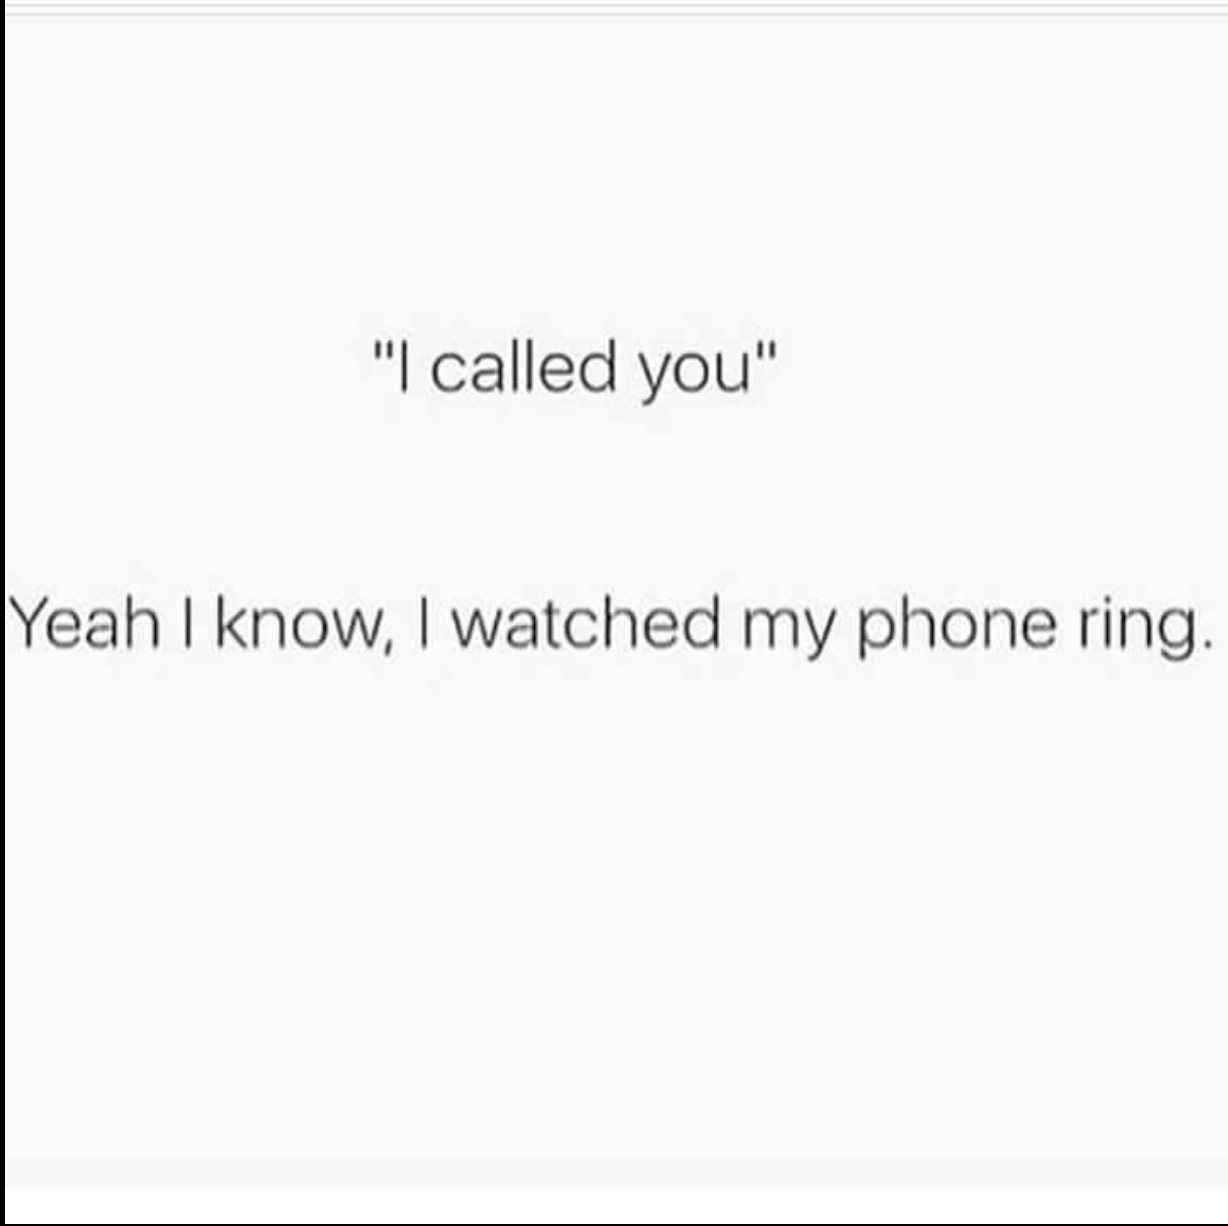 meme document - "I called you" Yeah I know, I watched my phone ring.